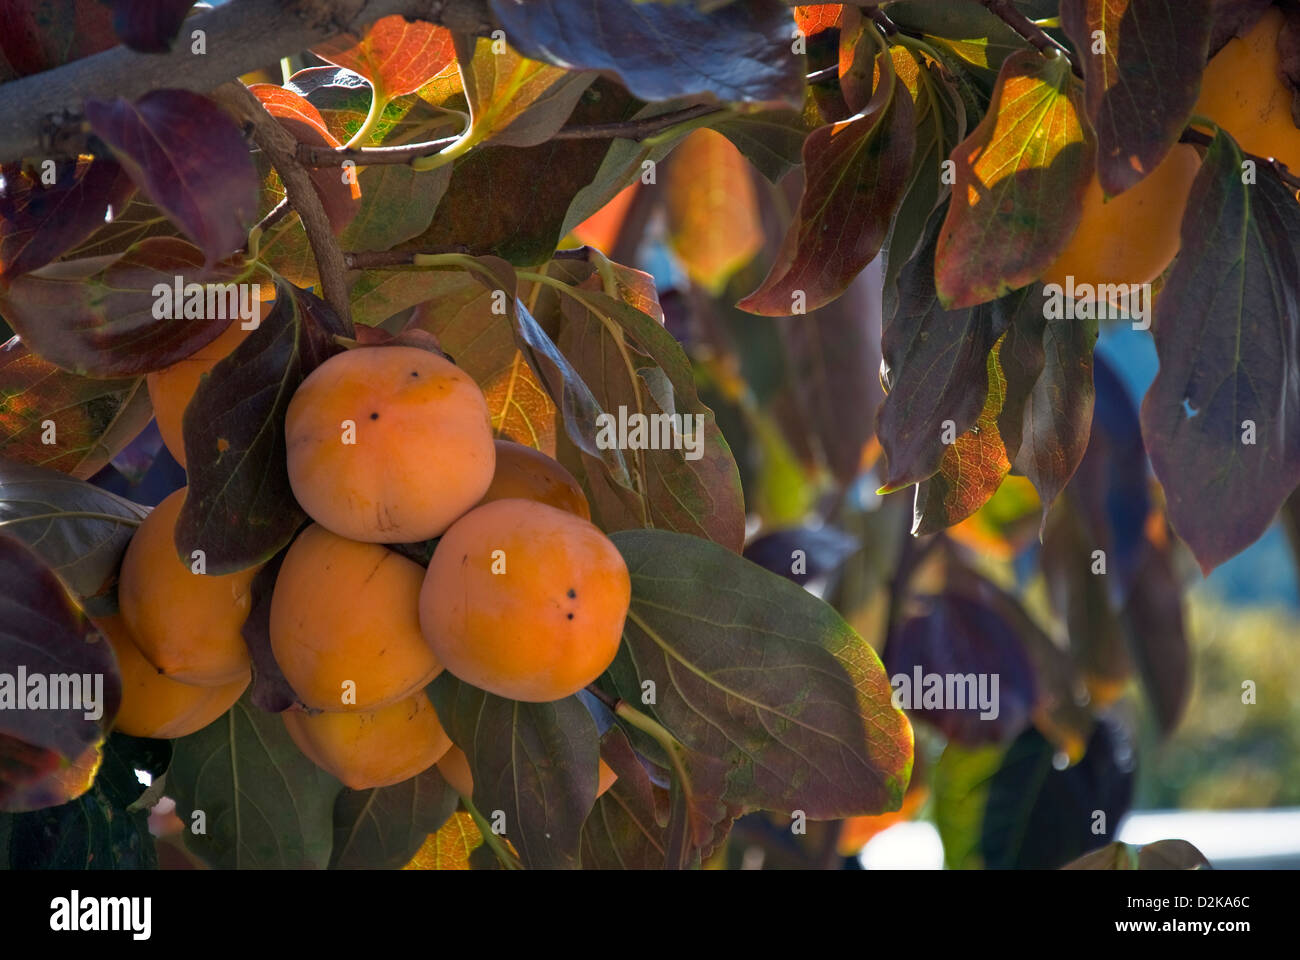 Persimmon fruits hanging on tree Stock Photo